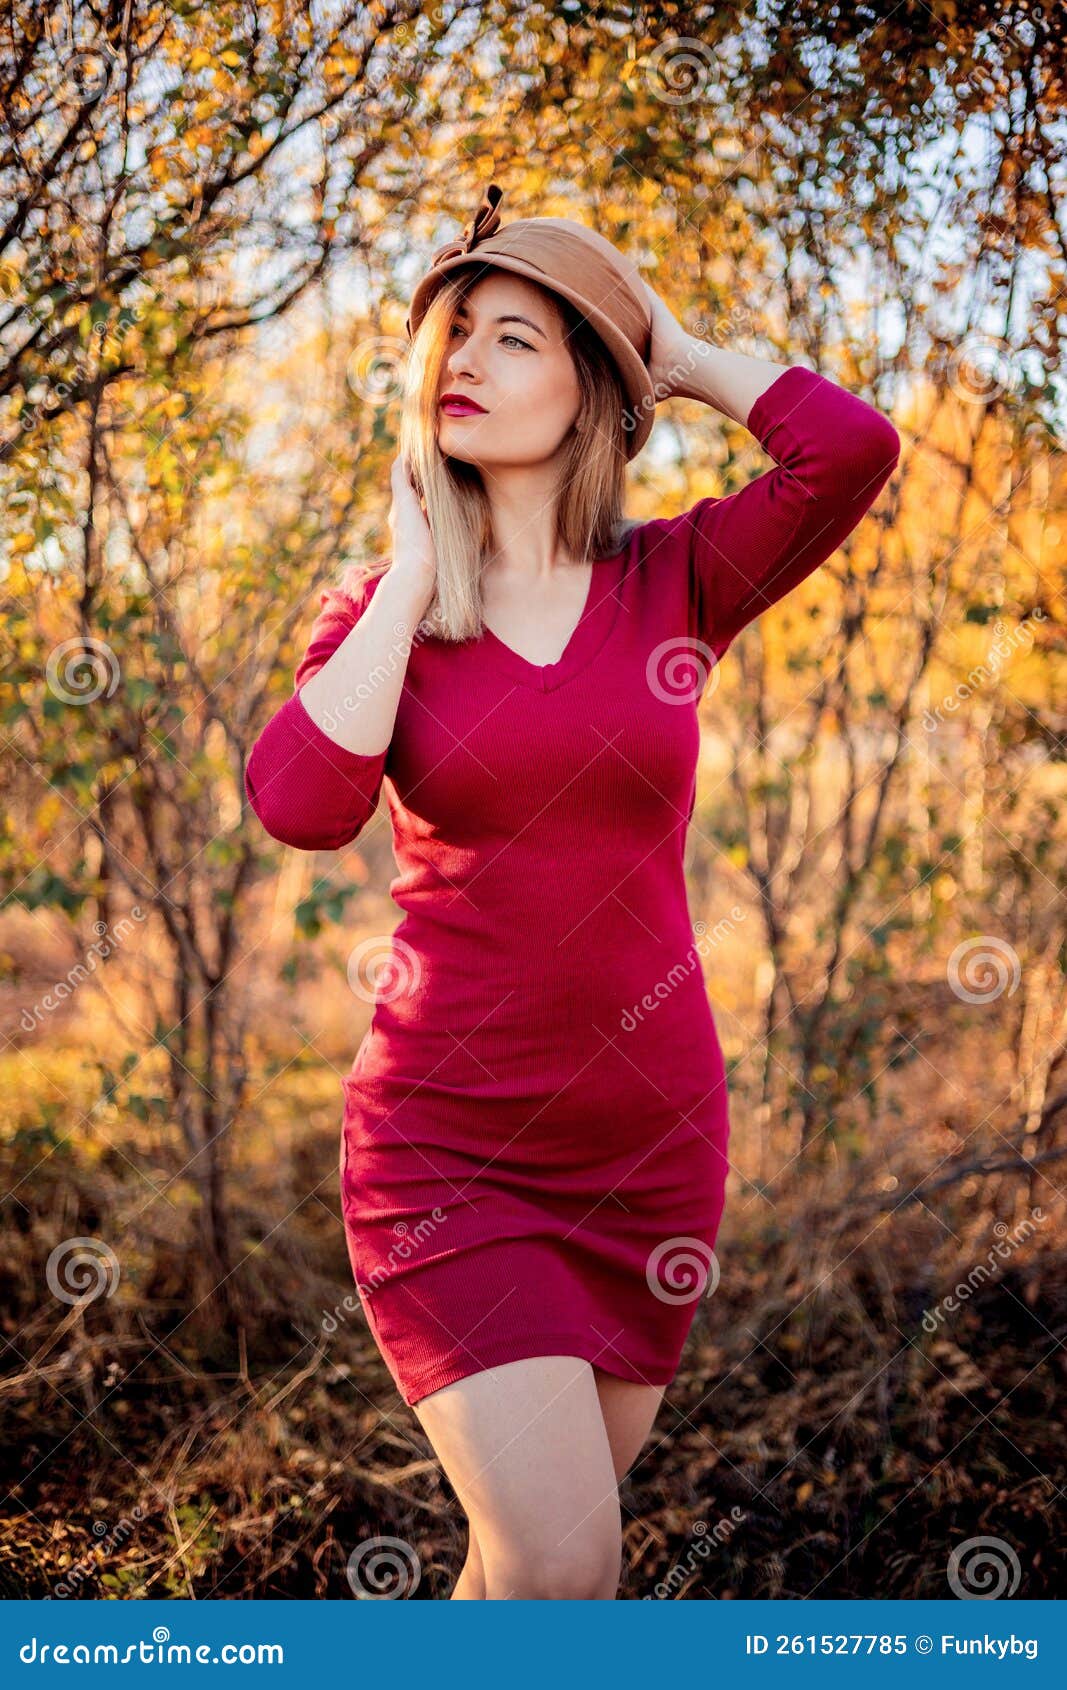 Cute Girl In Red Dress With Old Fashion Hat Retro Vibes In A Fall Scene Stock Image Image Of